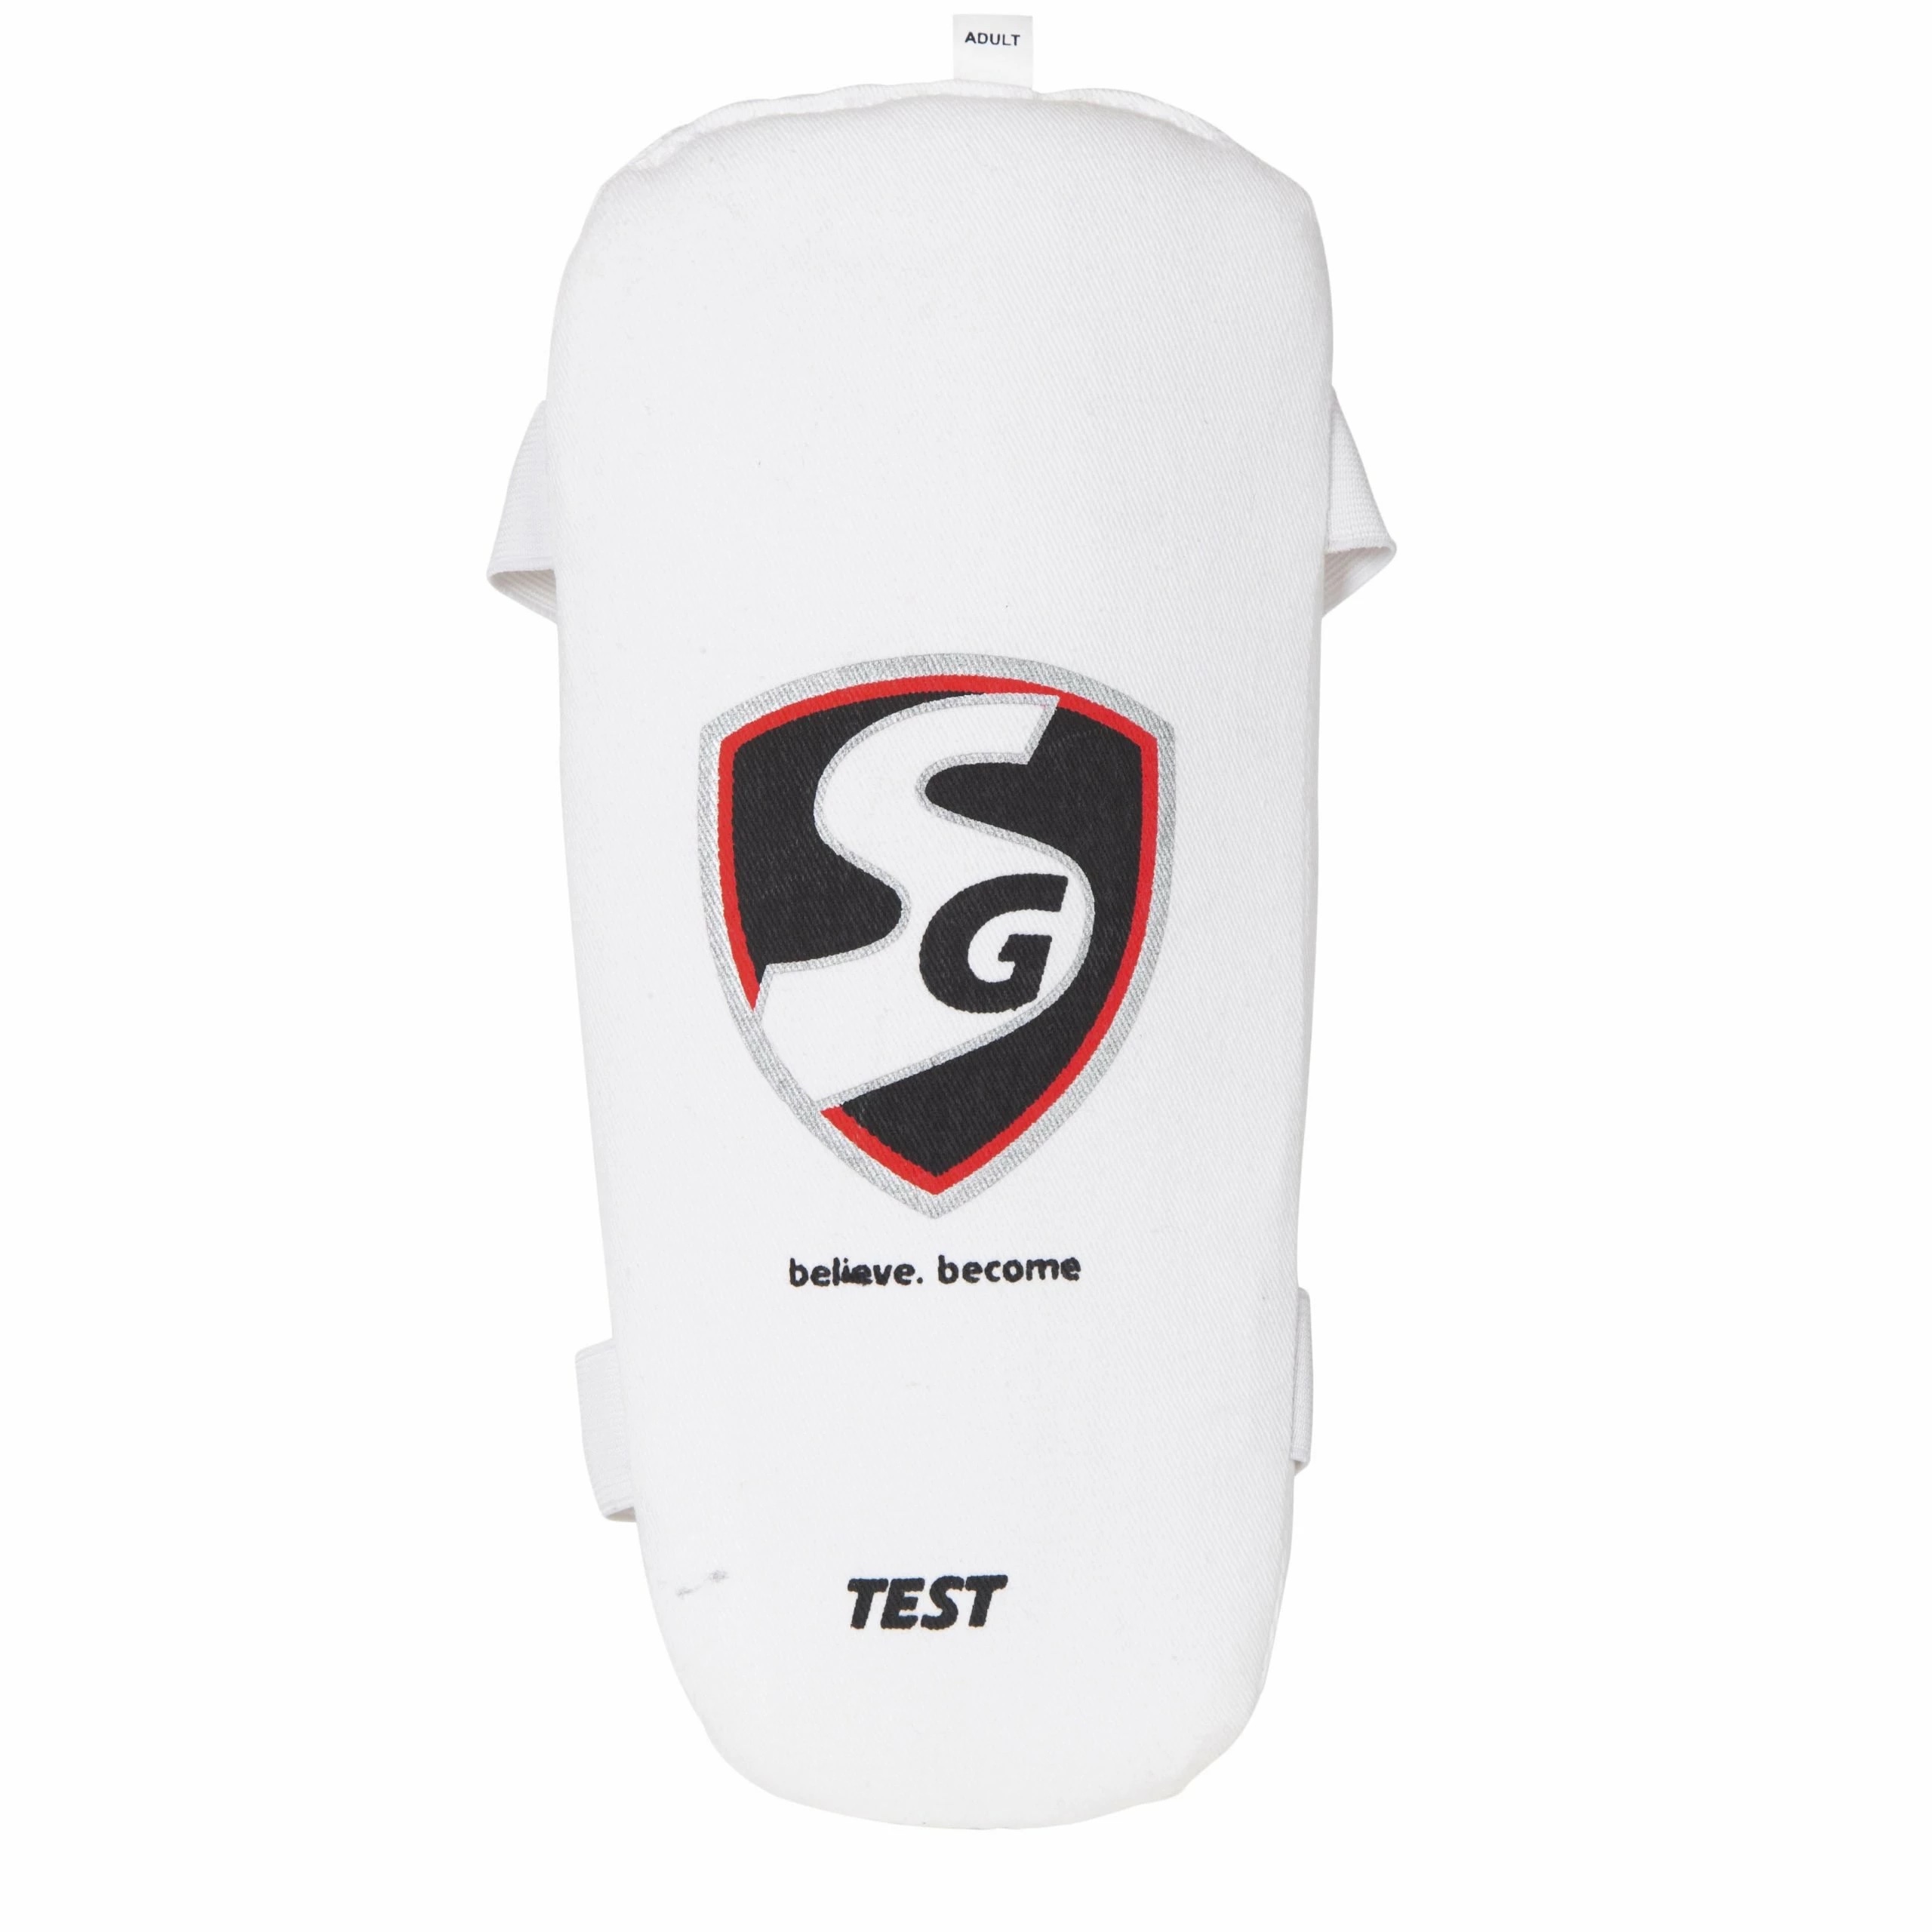 ELBOW GUARD SG TEST - YOUTH